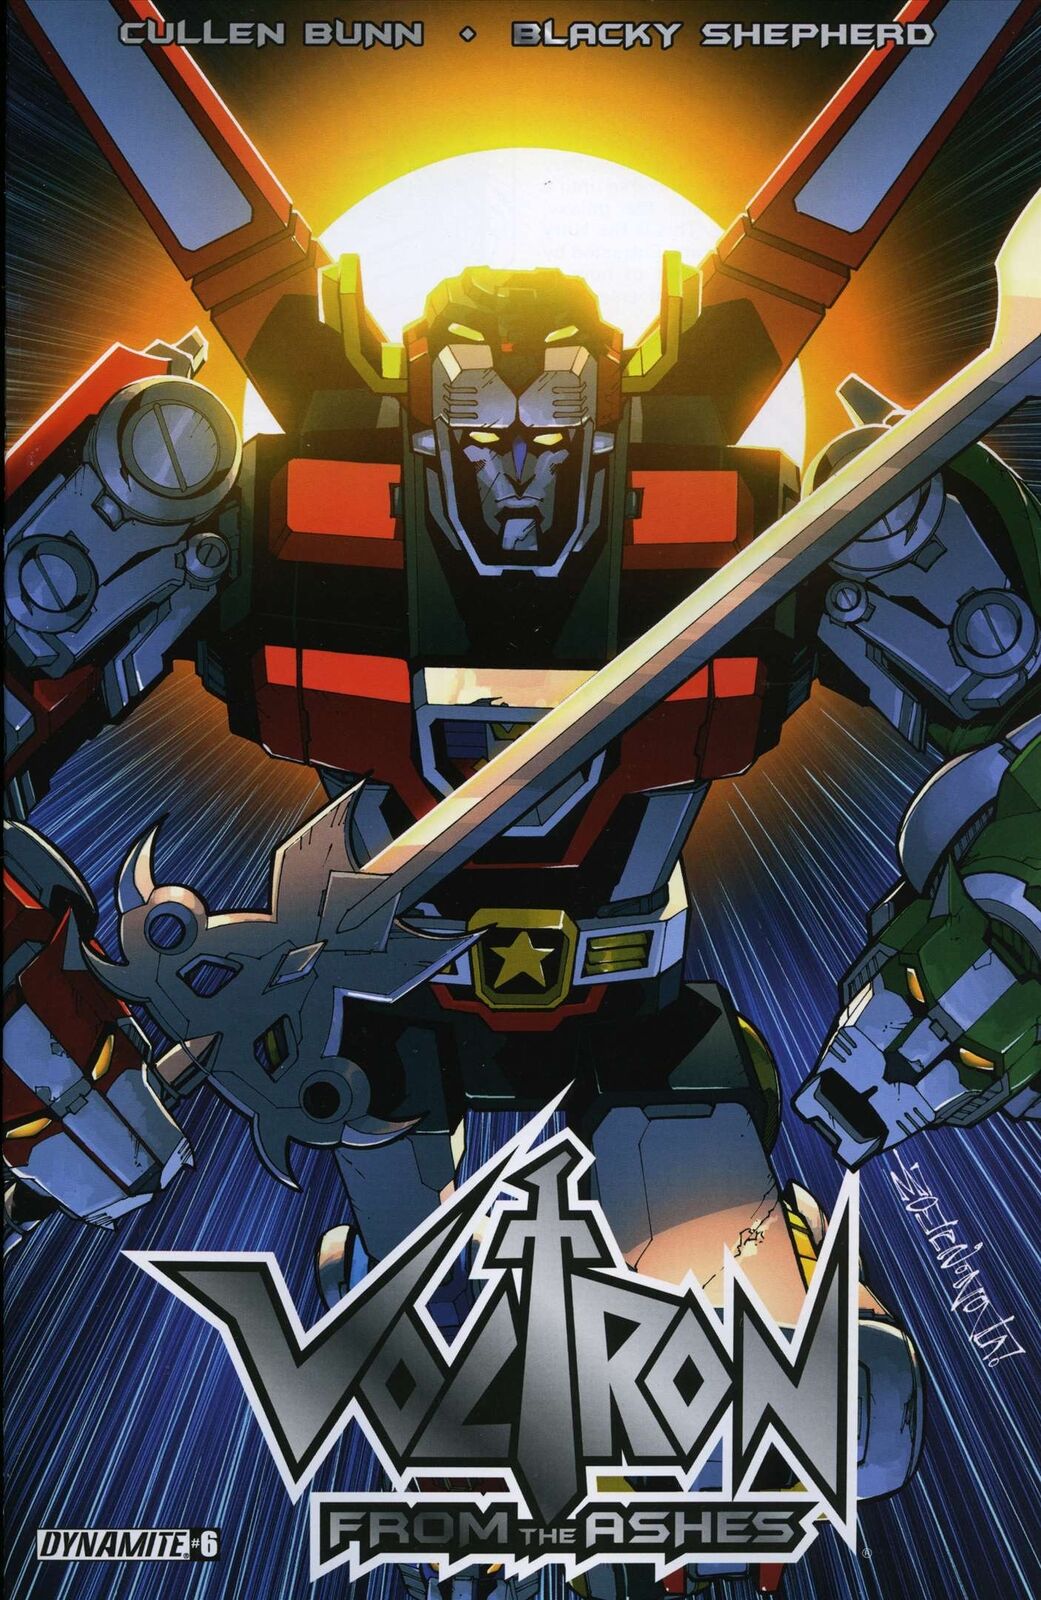 Voltron: From The Ashes #6 VF/NM; Dynamite | Cullen Bunn - we combine shipping